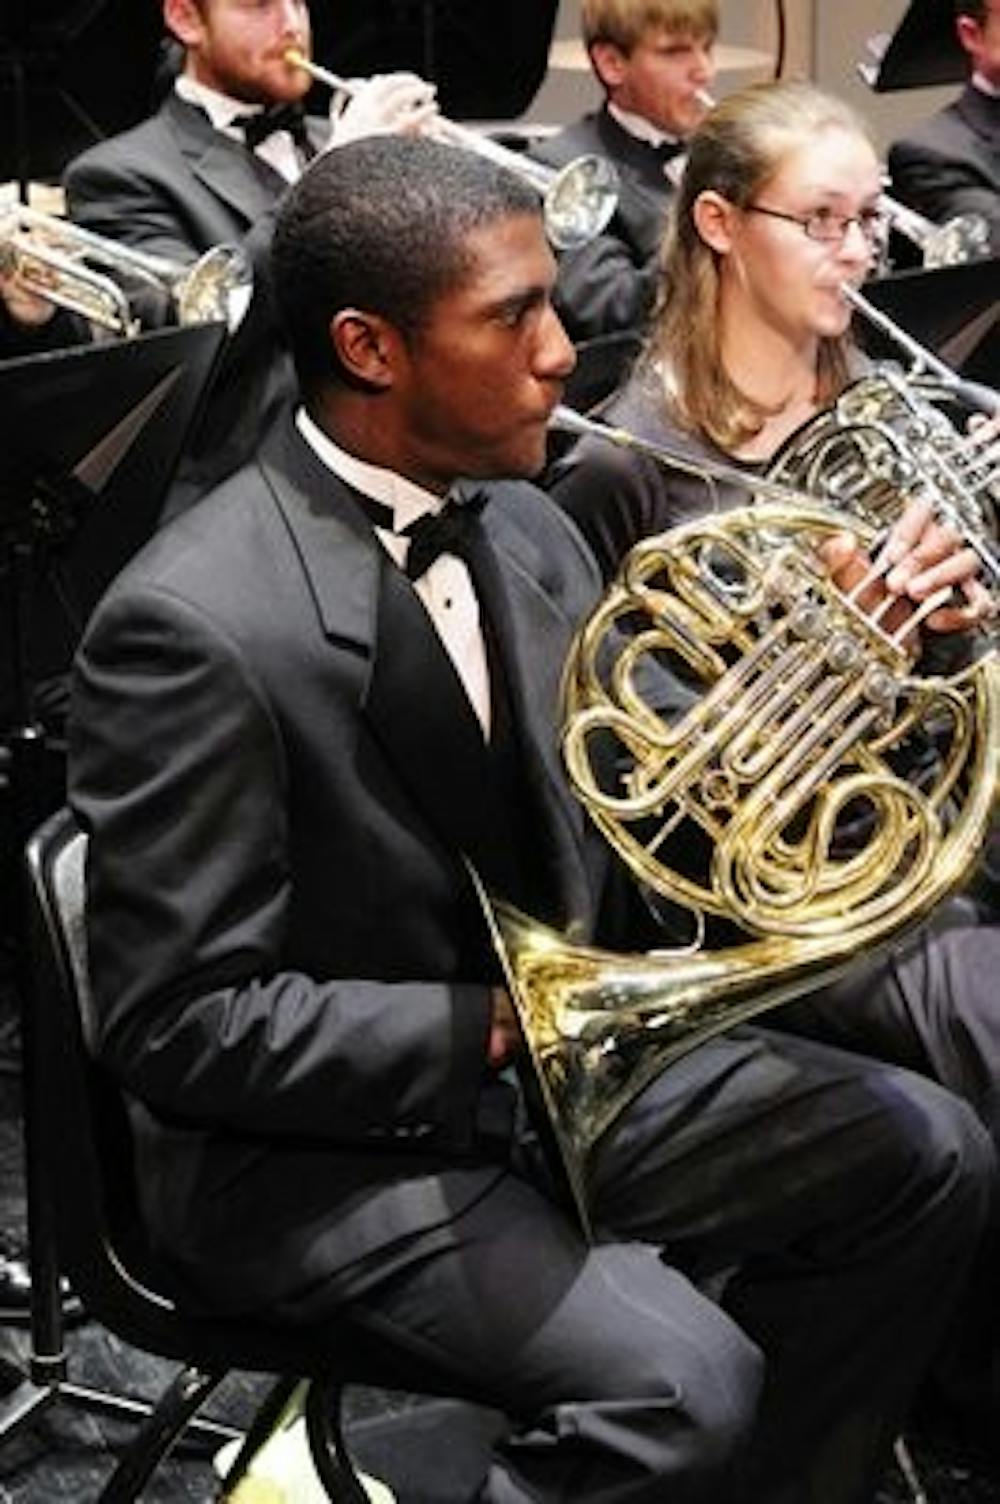 Daniel Johnson, member of The Auburn University Band, plays his french horn during the benefit concert in memory of Sarah Anderson.